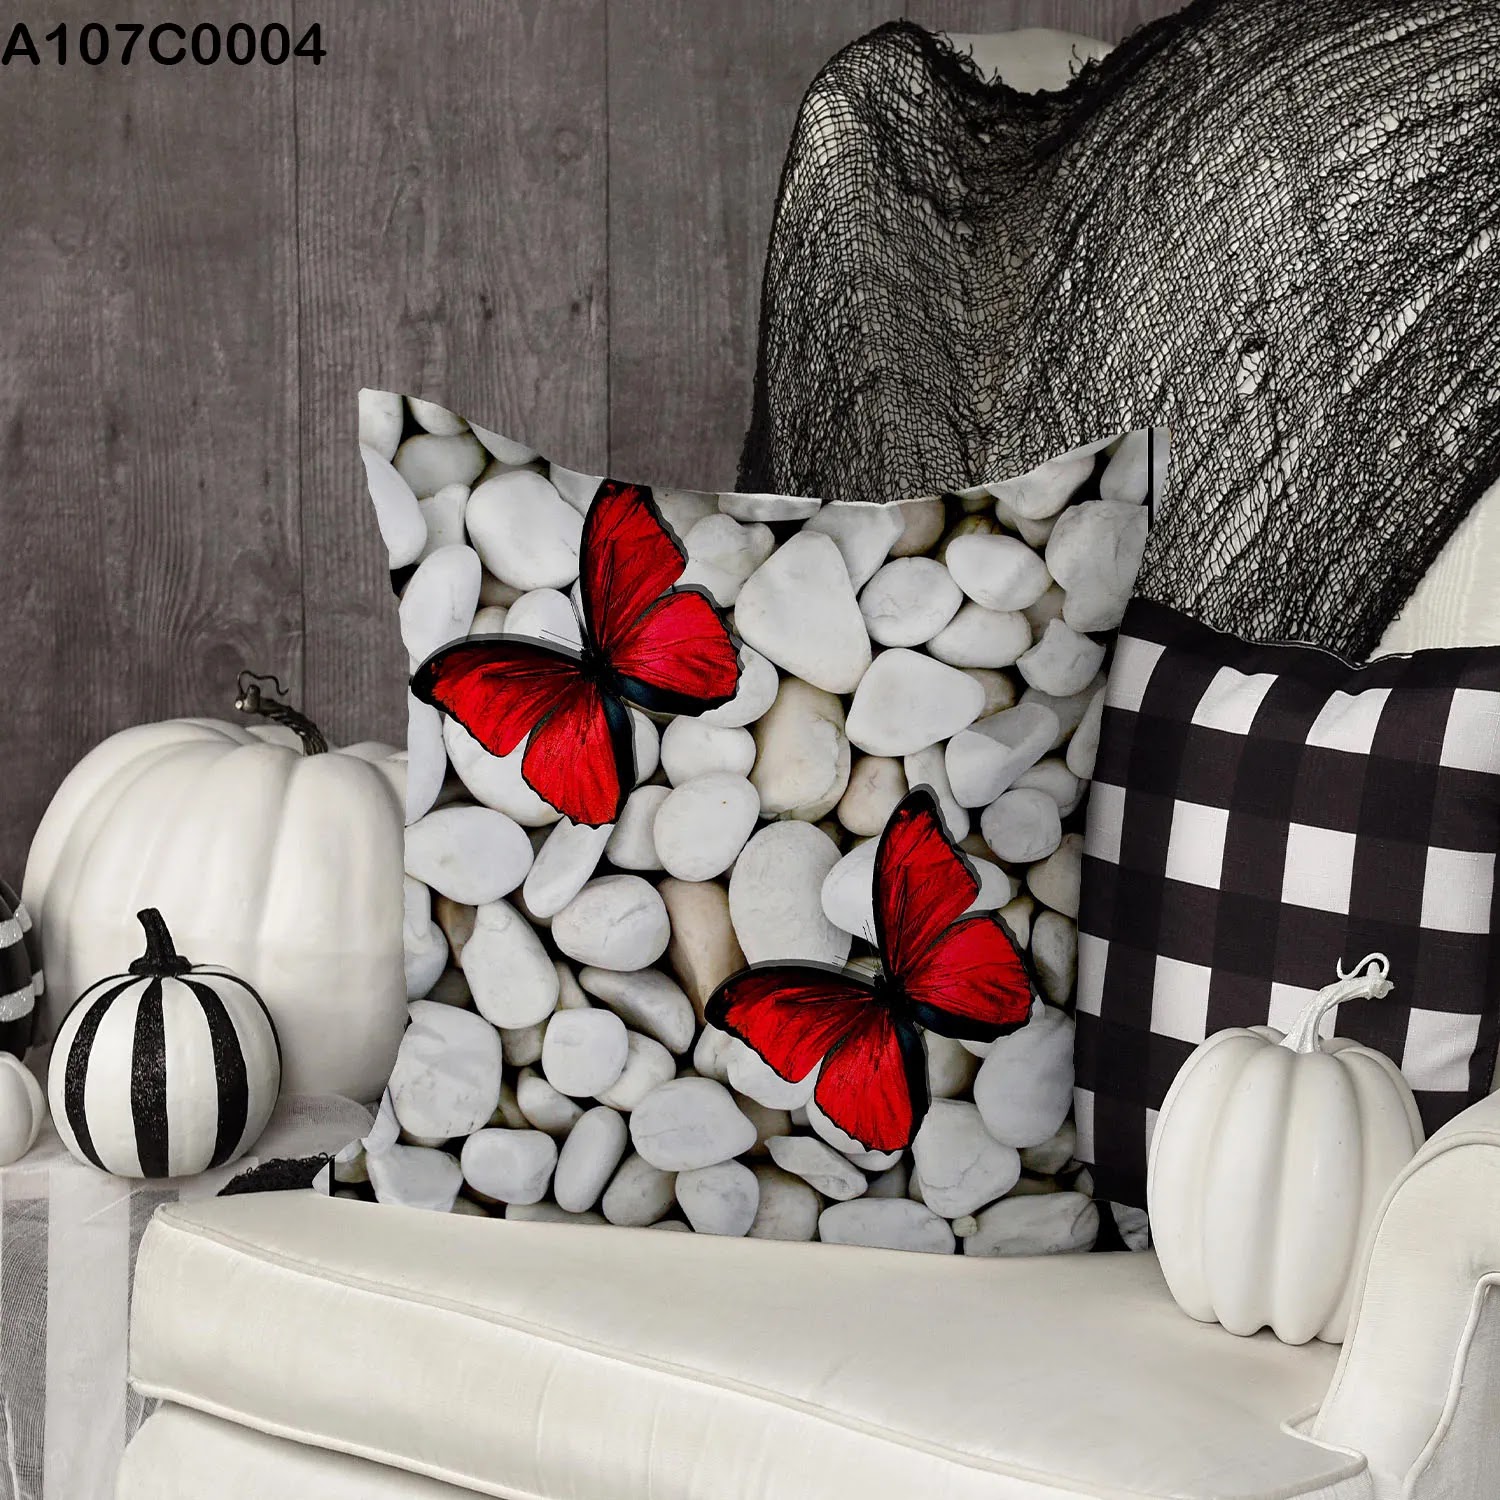 Pillow case with red Butterflies and white pebbles